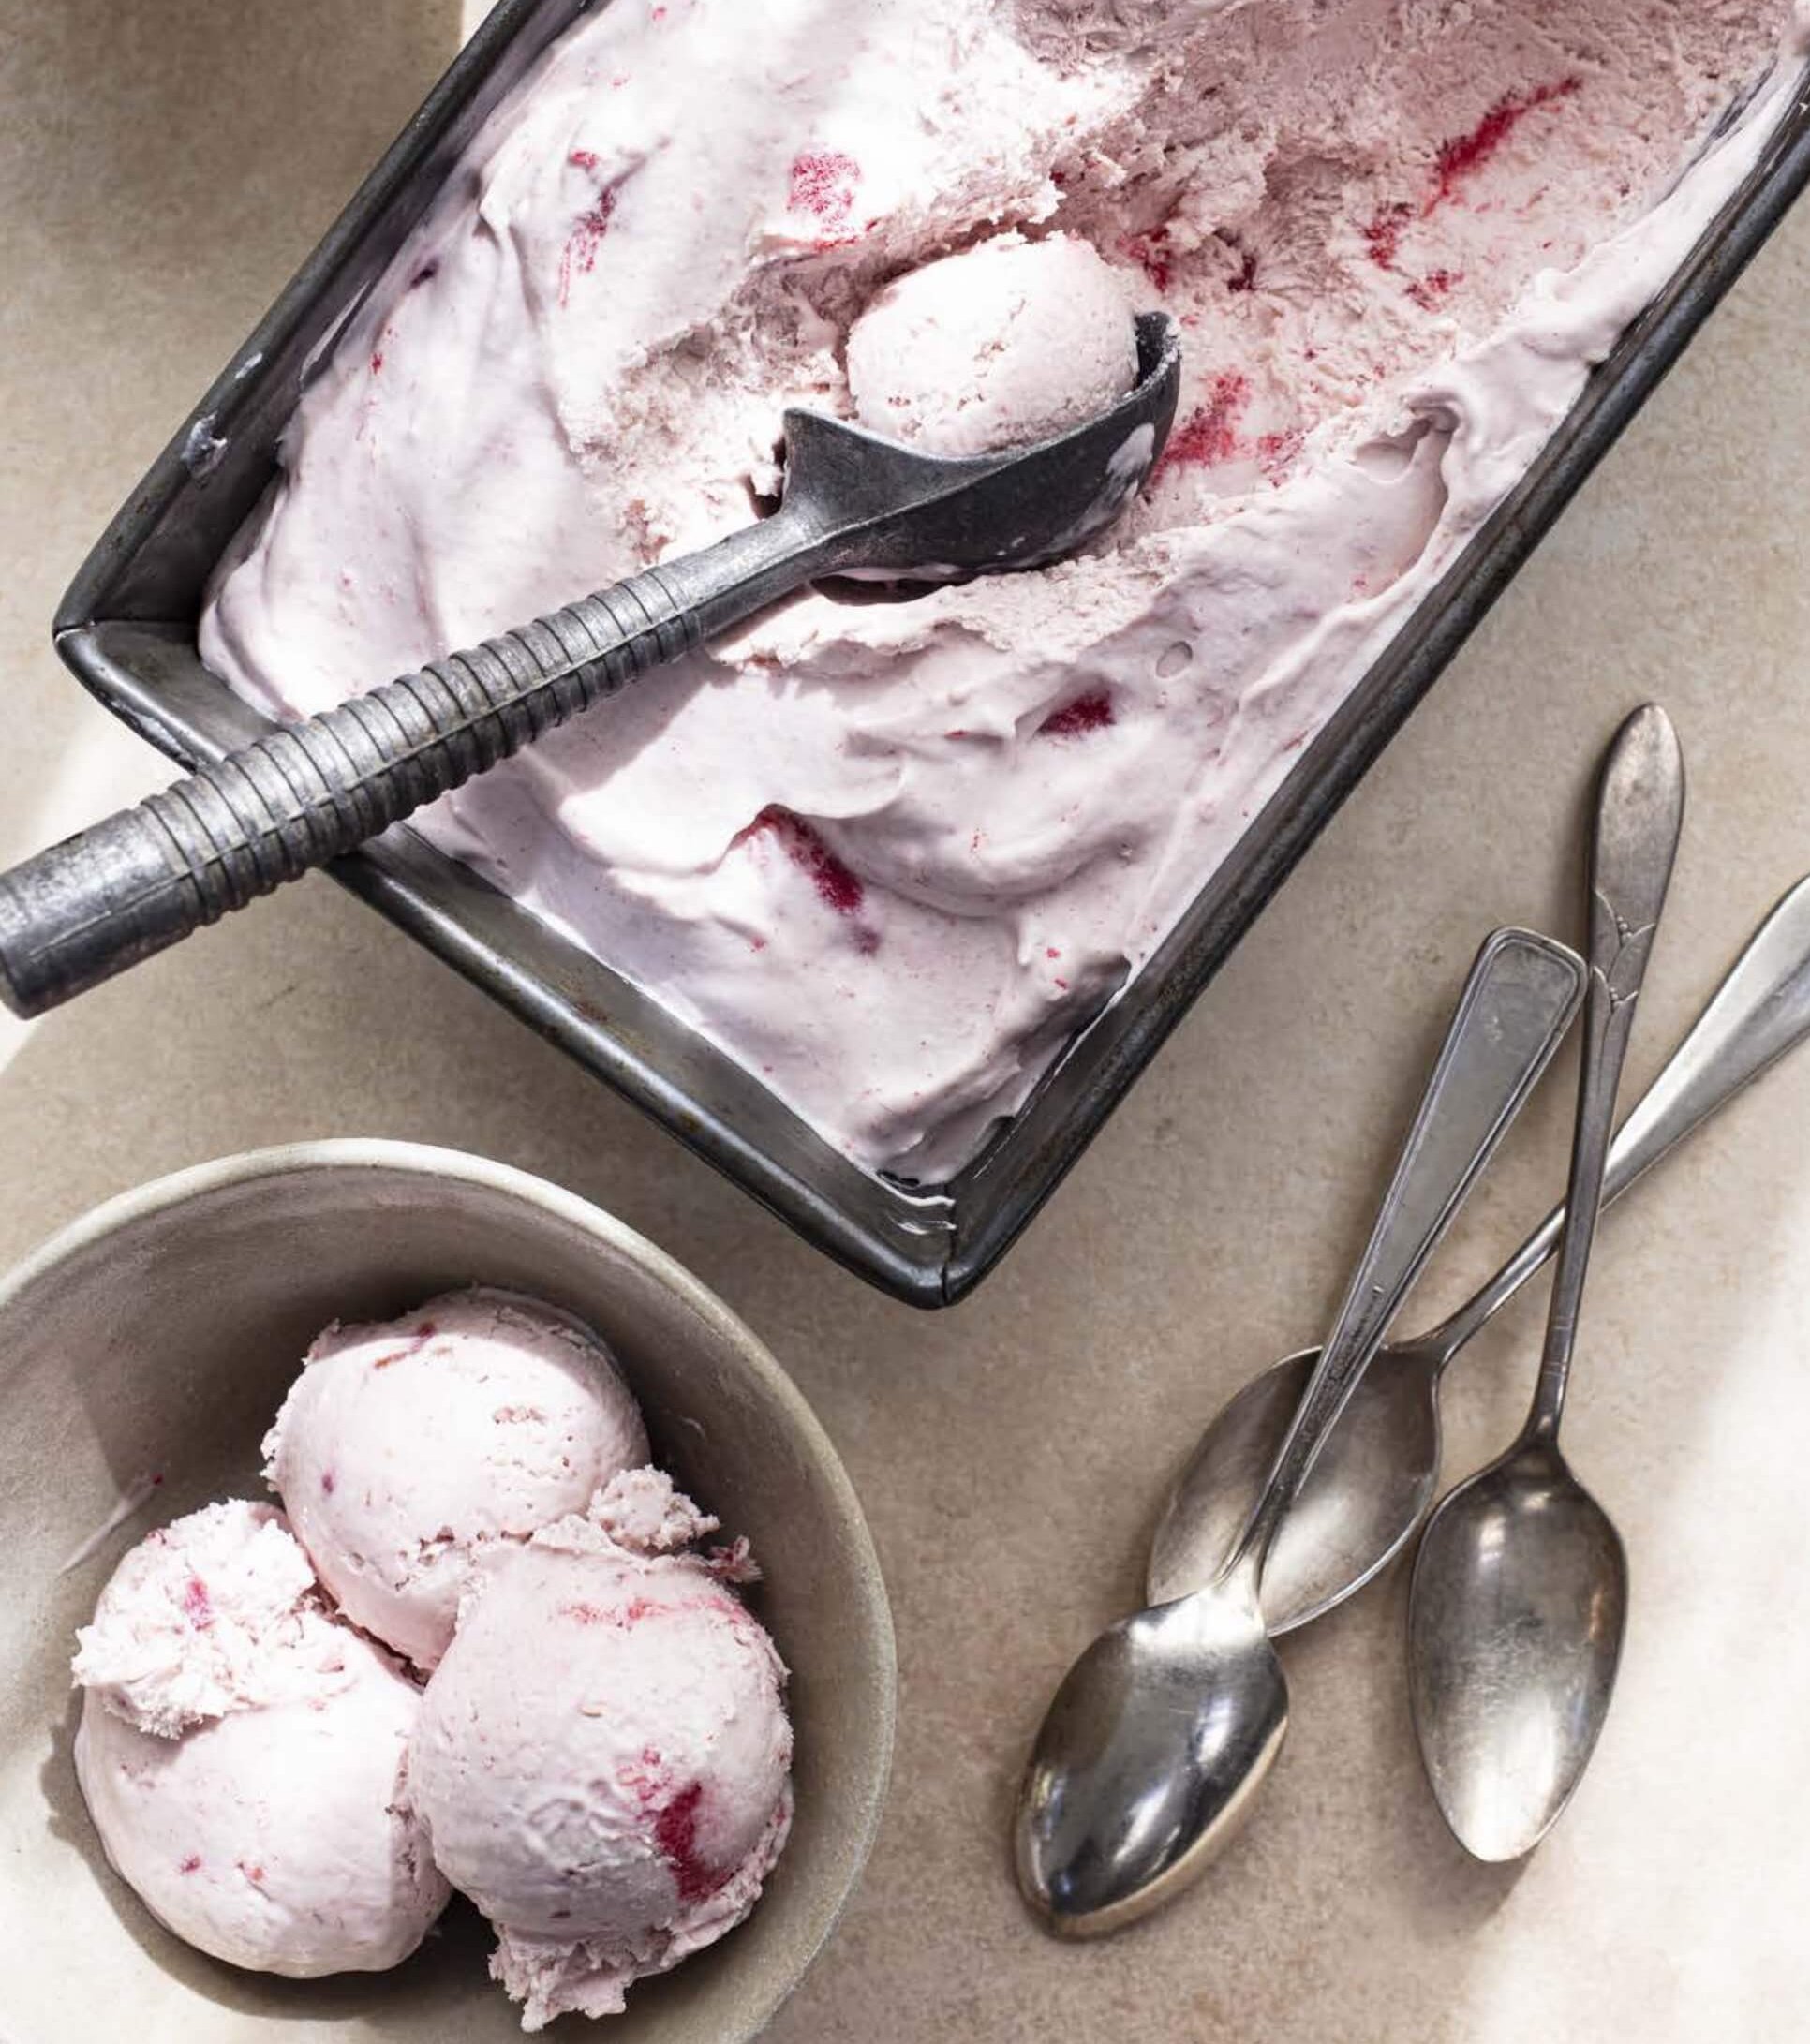 A pink-coloured ice cream in a silver vat with scoops and spoons